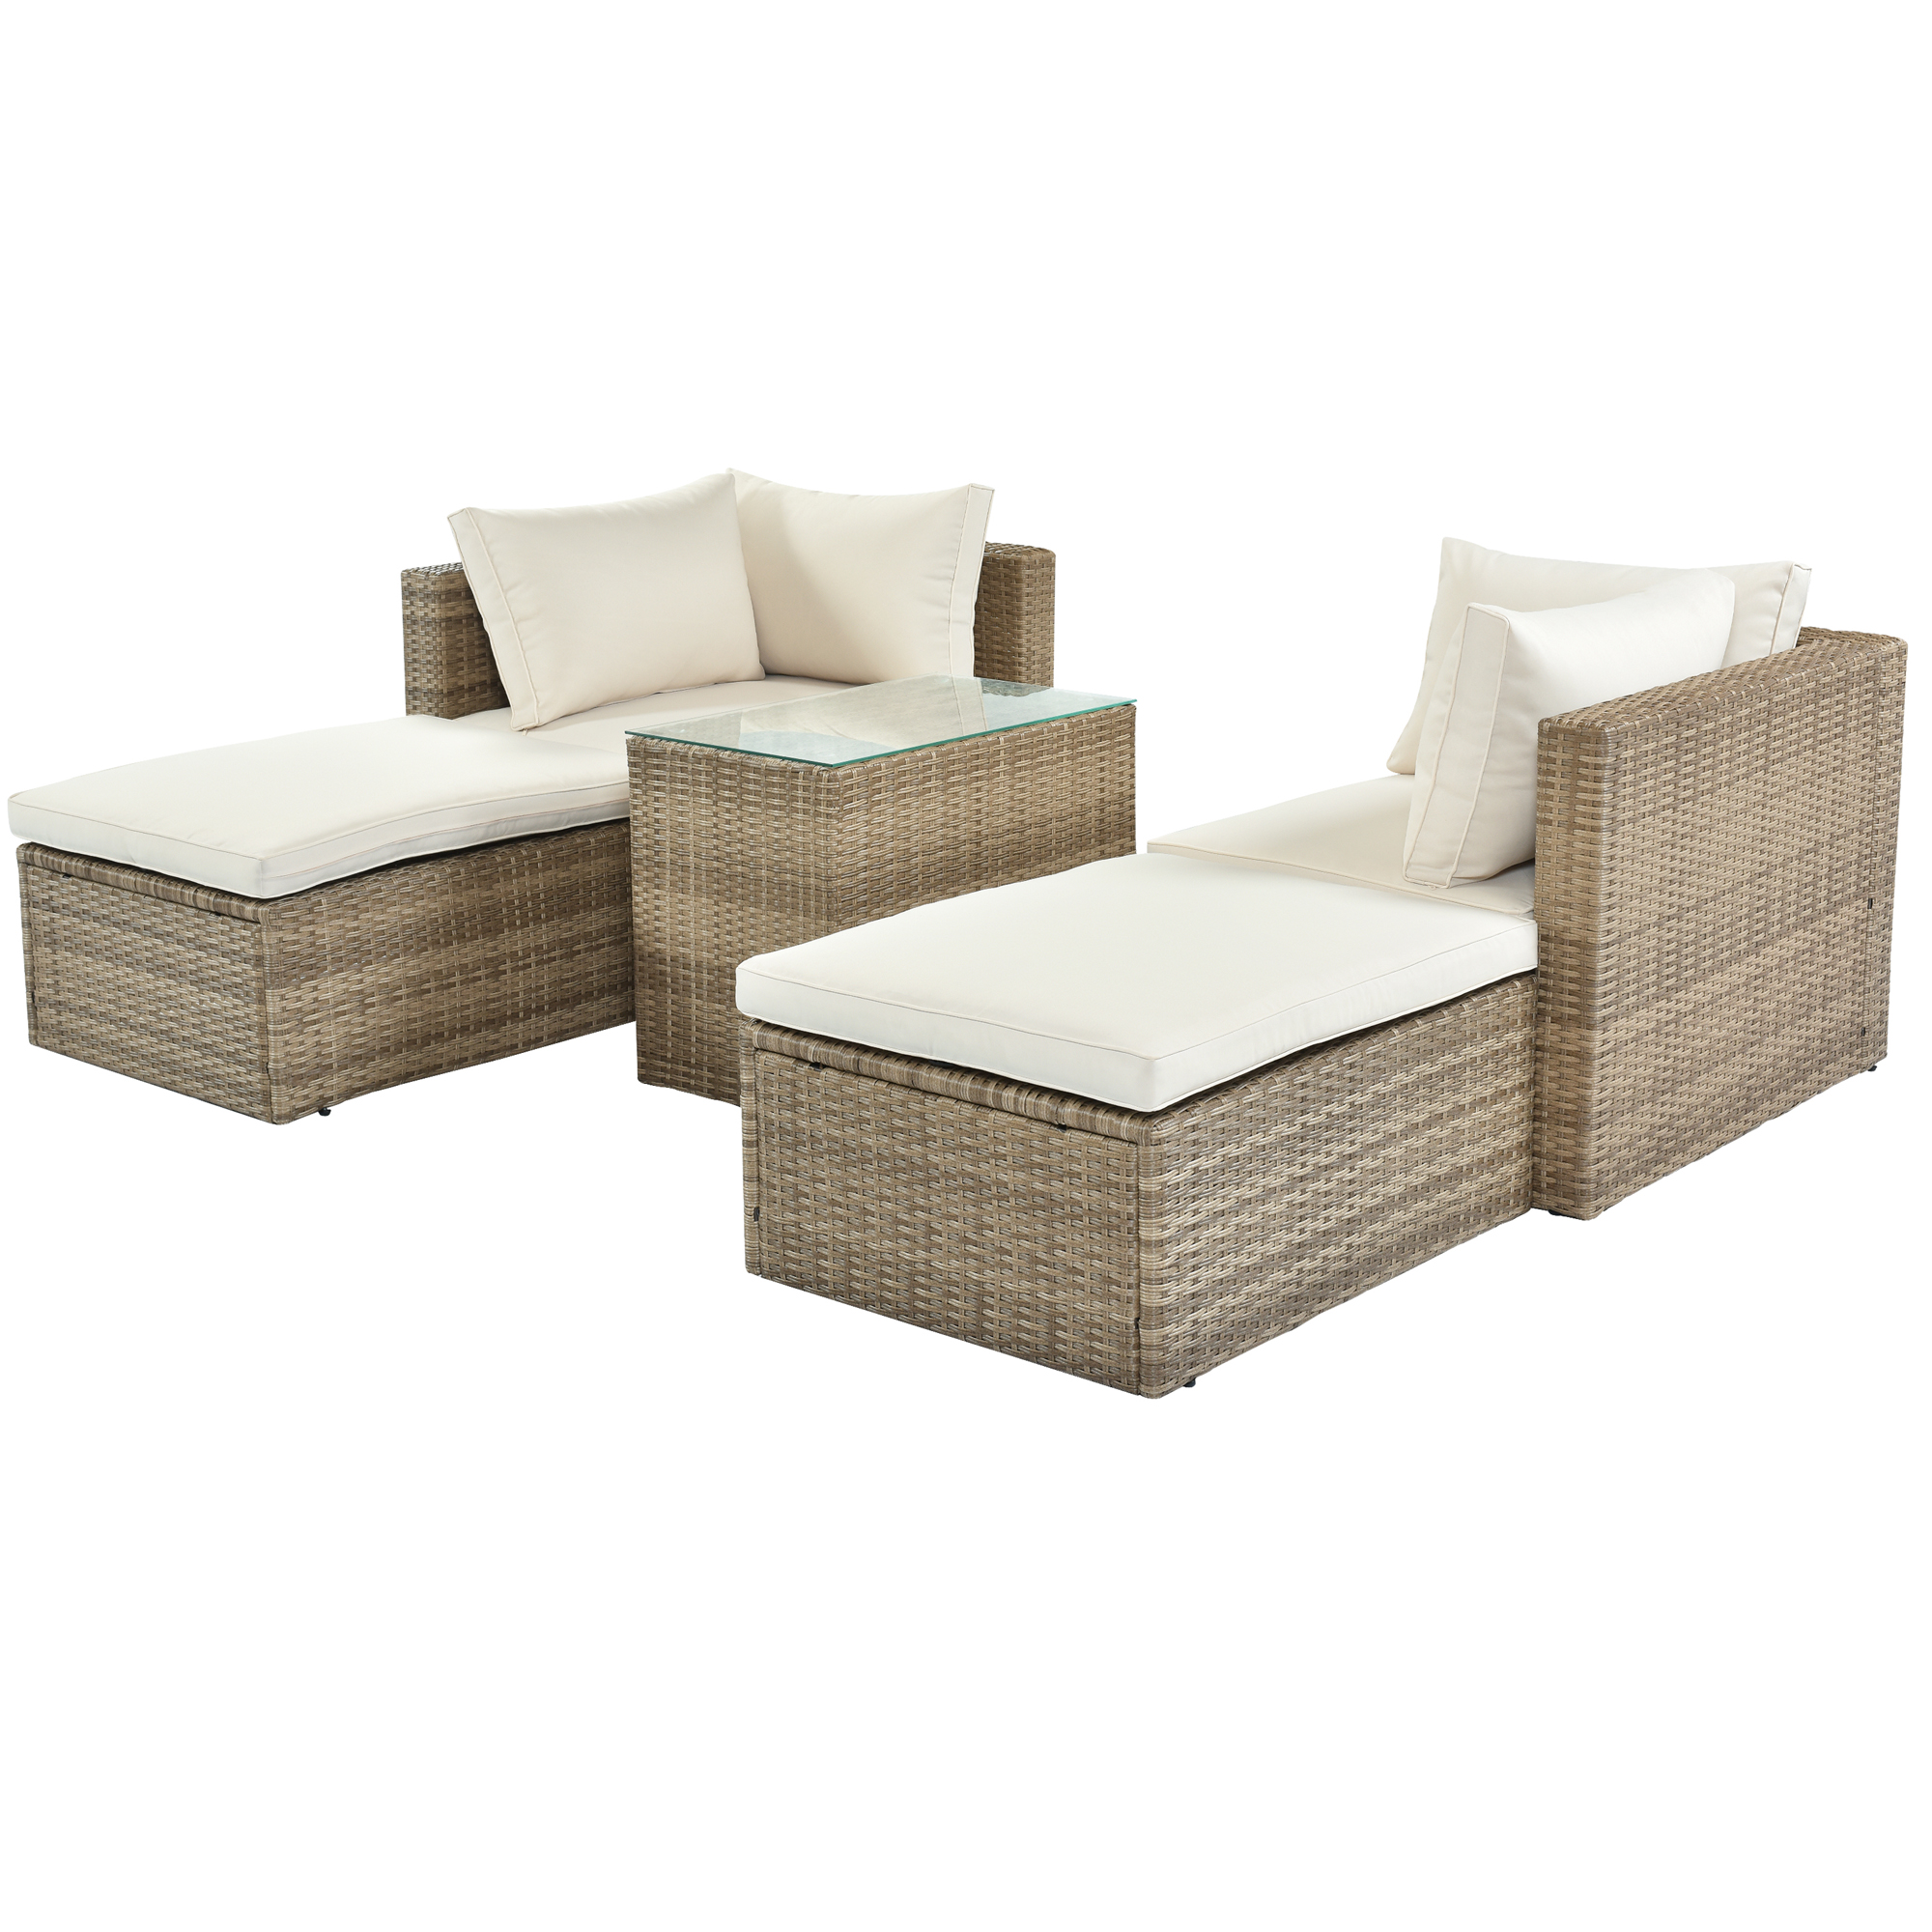 UWR-Nite 5 Piece Wicker Patio Furniture Set, PE Wicker Rattan Small Patio Set Porch Furniture, Cushioned Patio Chairs Set w/Ottoman &Table, Outdoor Lounge Chair Chat Conversation Set - image 3 of 6